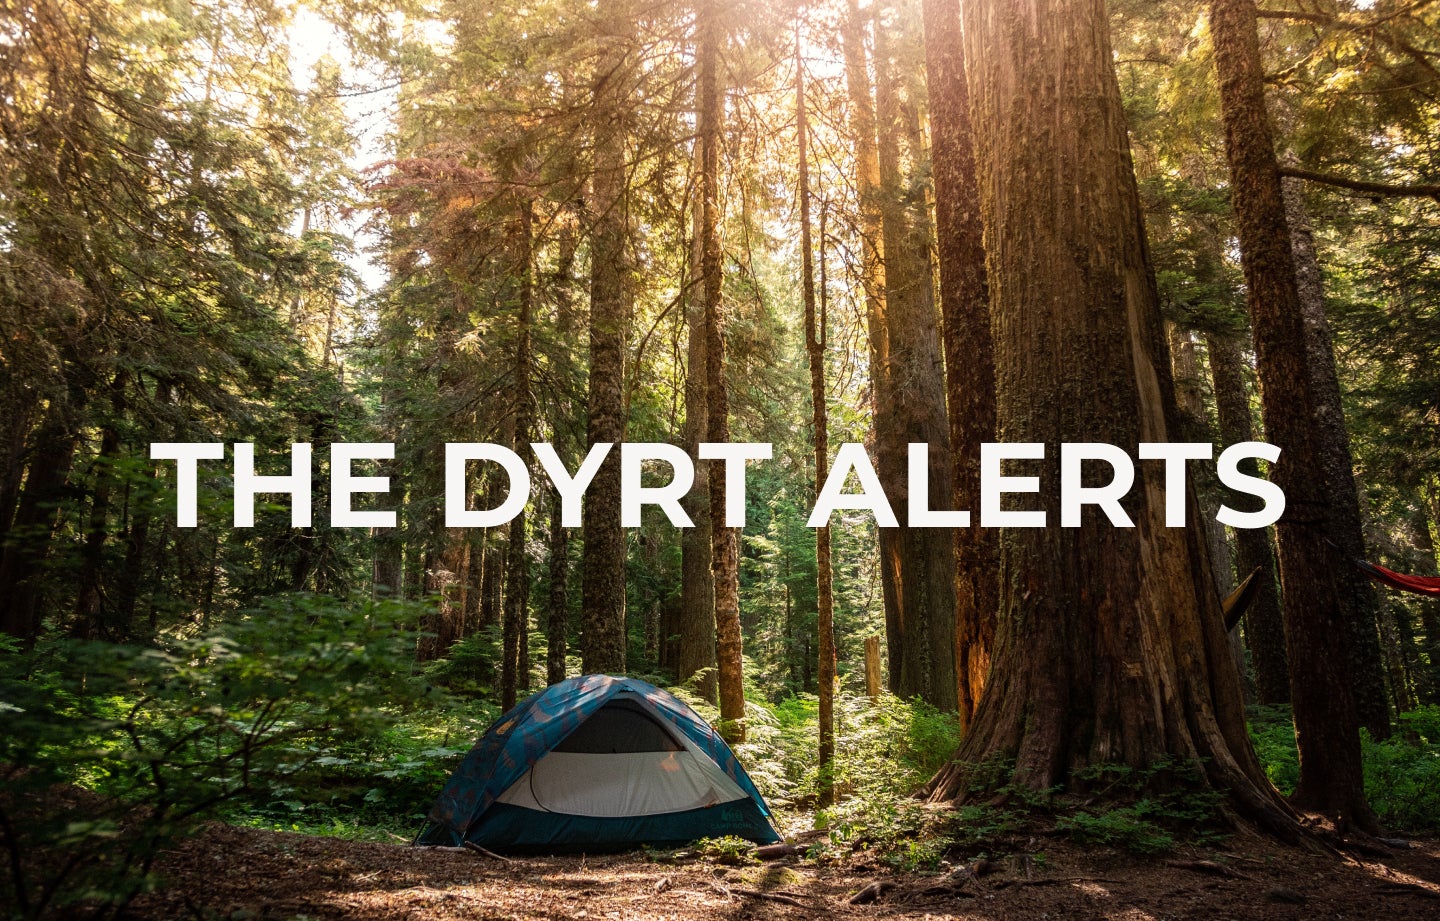 Which sold-out campgrounds can you scan for cancellations using The Dyrt Alerts? pic